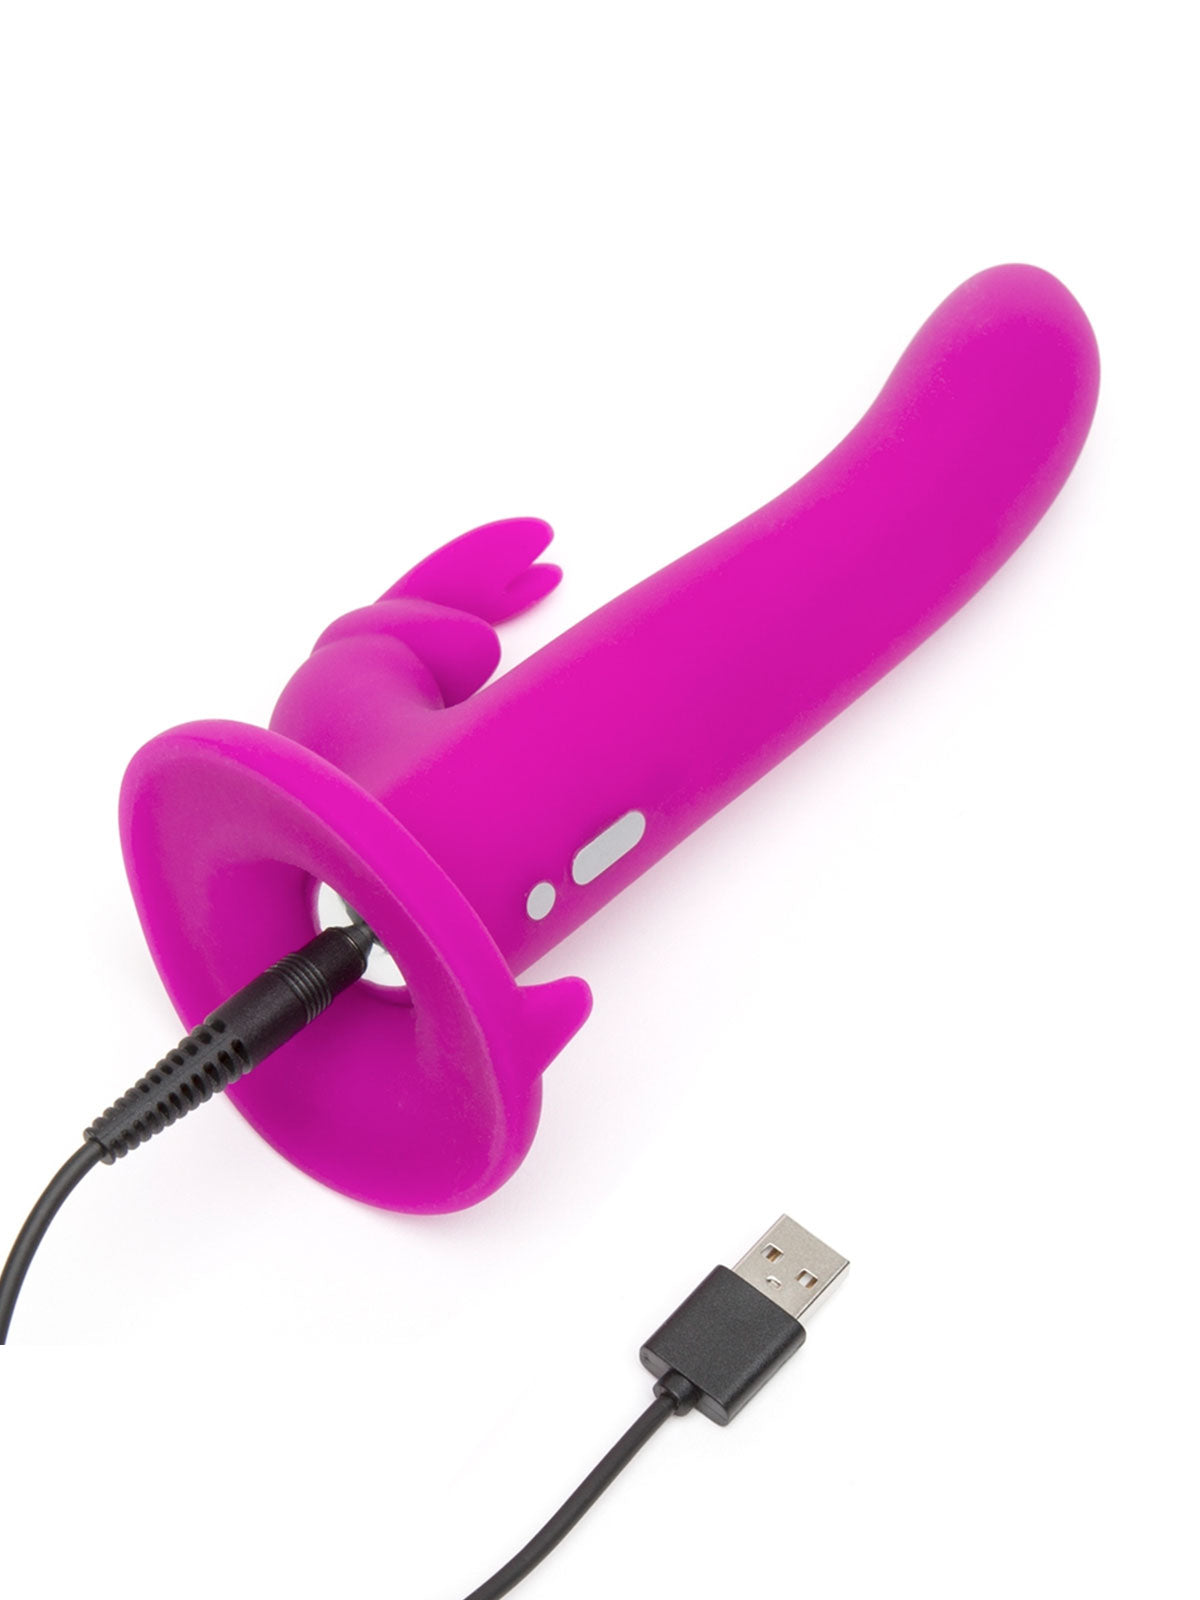 Strap on Dildo by Happy Rabbit Charger